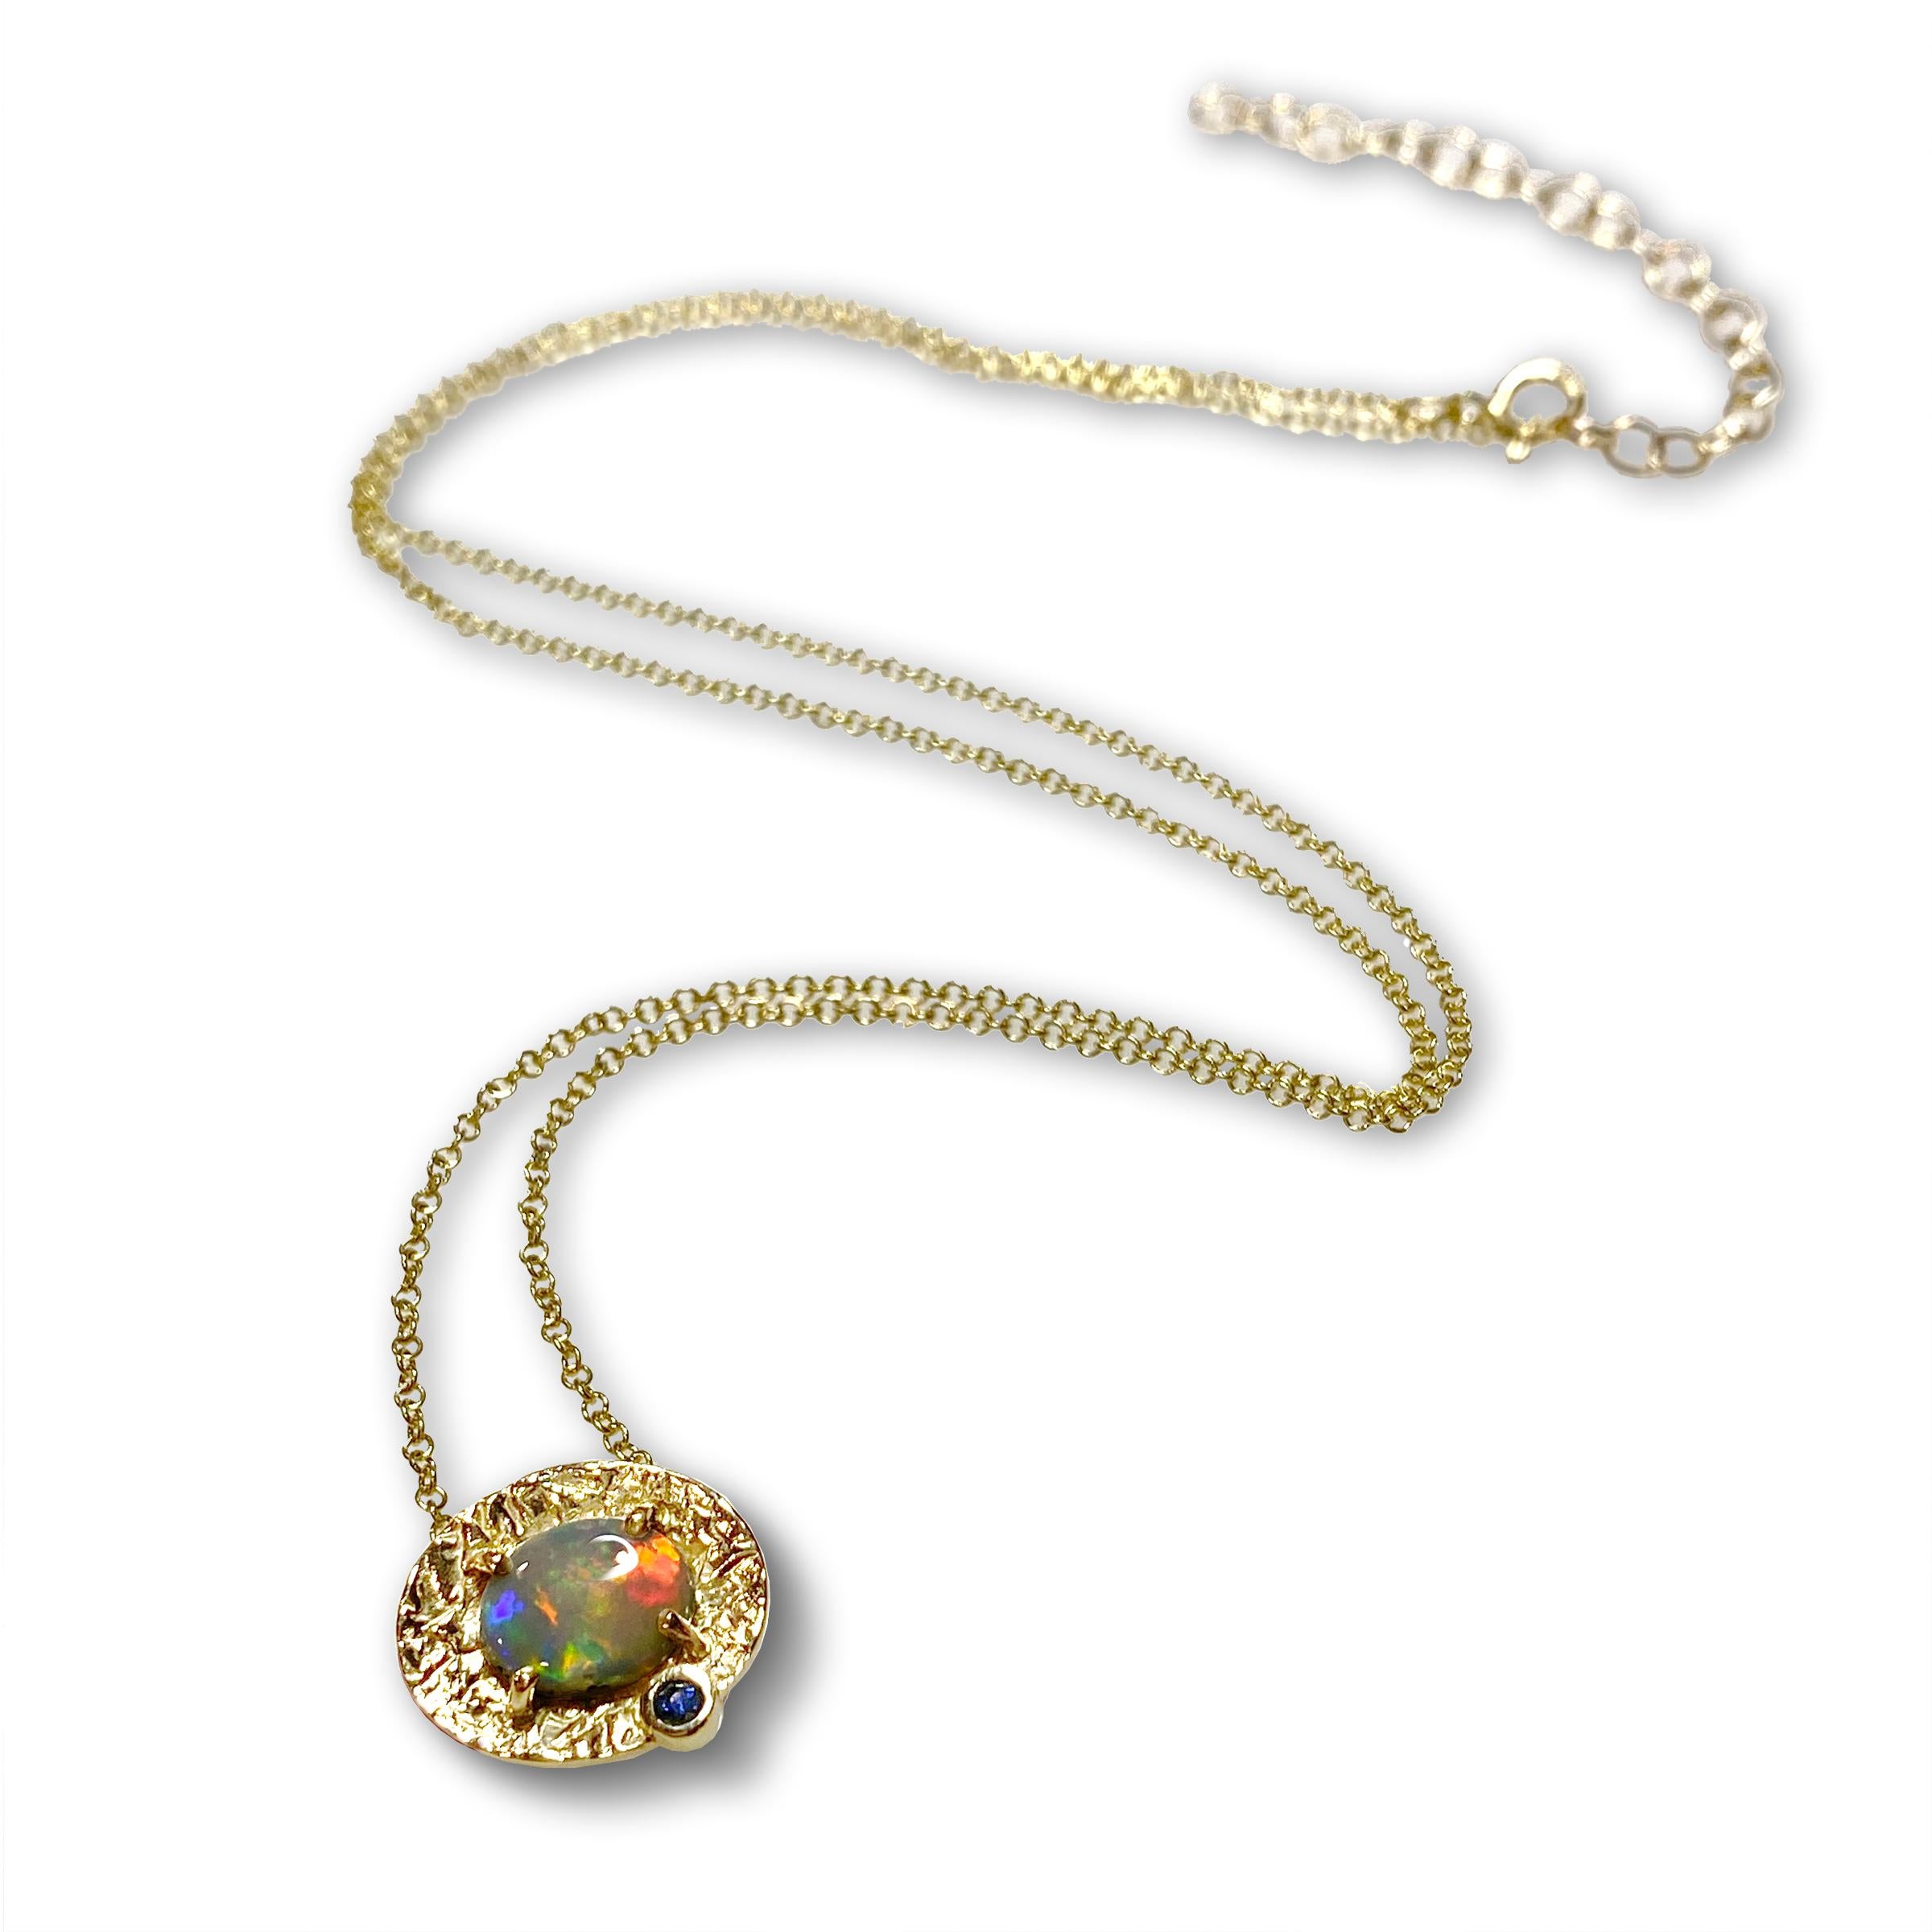 Keiko Mita's unique Petite Marigold Necklace is handmade from a multi-color Australian Opal (0.69 Carats) set in a textured 14 Karat Yellow Gold frame accented with a Blue Sapphire. The beautiful Opal, which is from Australia'a famous Lighting Ridge